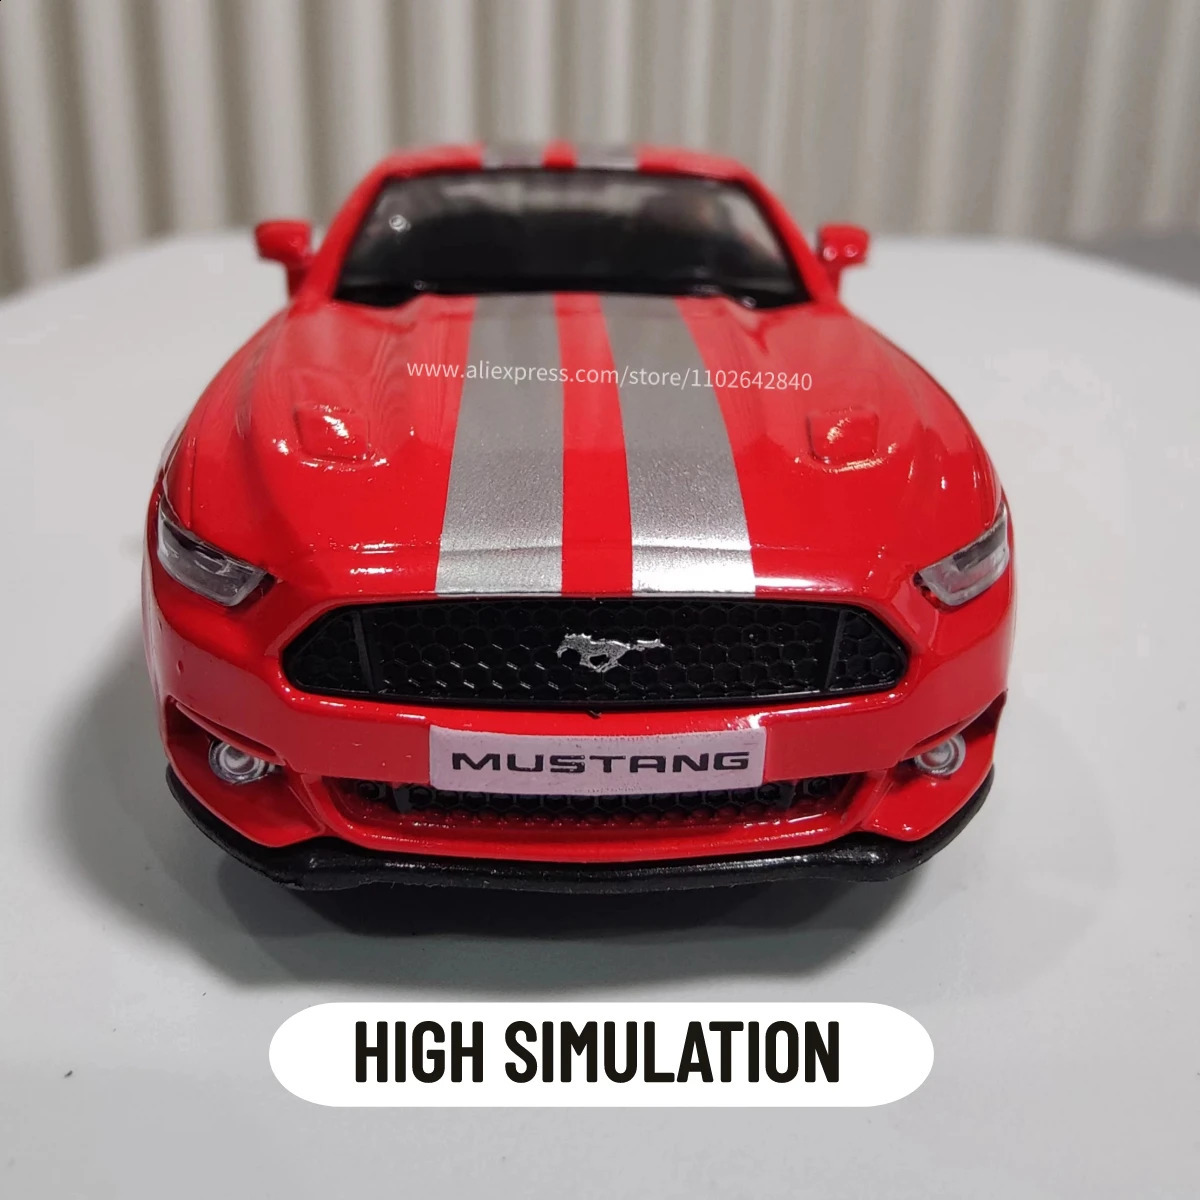 Electric RC Car 1 36 Metal Diecast Model Repilca Ford Mustang Skala Miniature Collection Vehicle Hobby Kid Toy for Boy Xmas Gift 231218